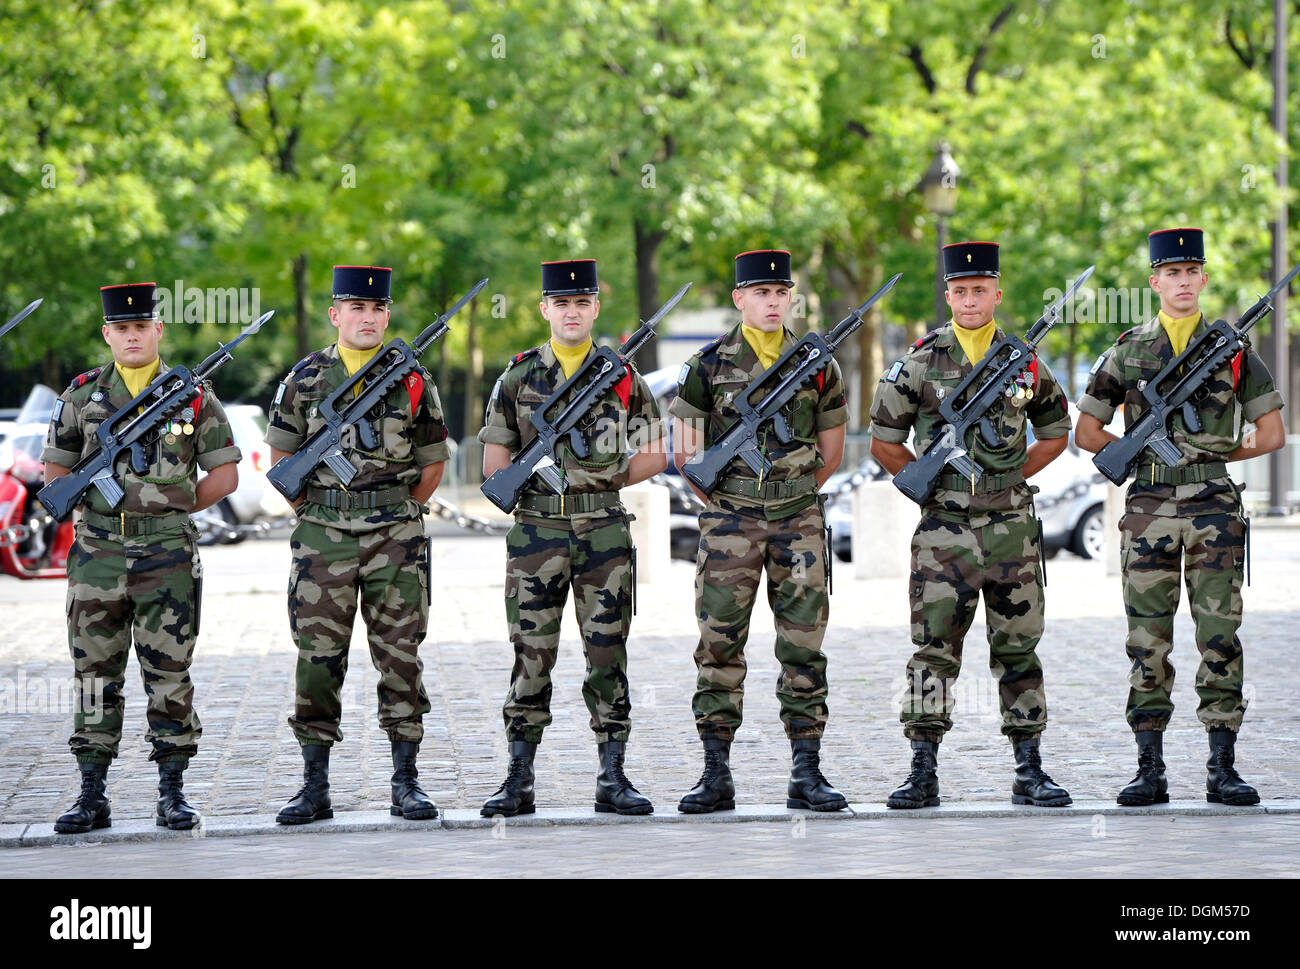 Honor guard, soldiers of the French Army at the Tomb of the Unknown Soldier, Place Charles de Gaulle Airport, Paris, France Stock Photo